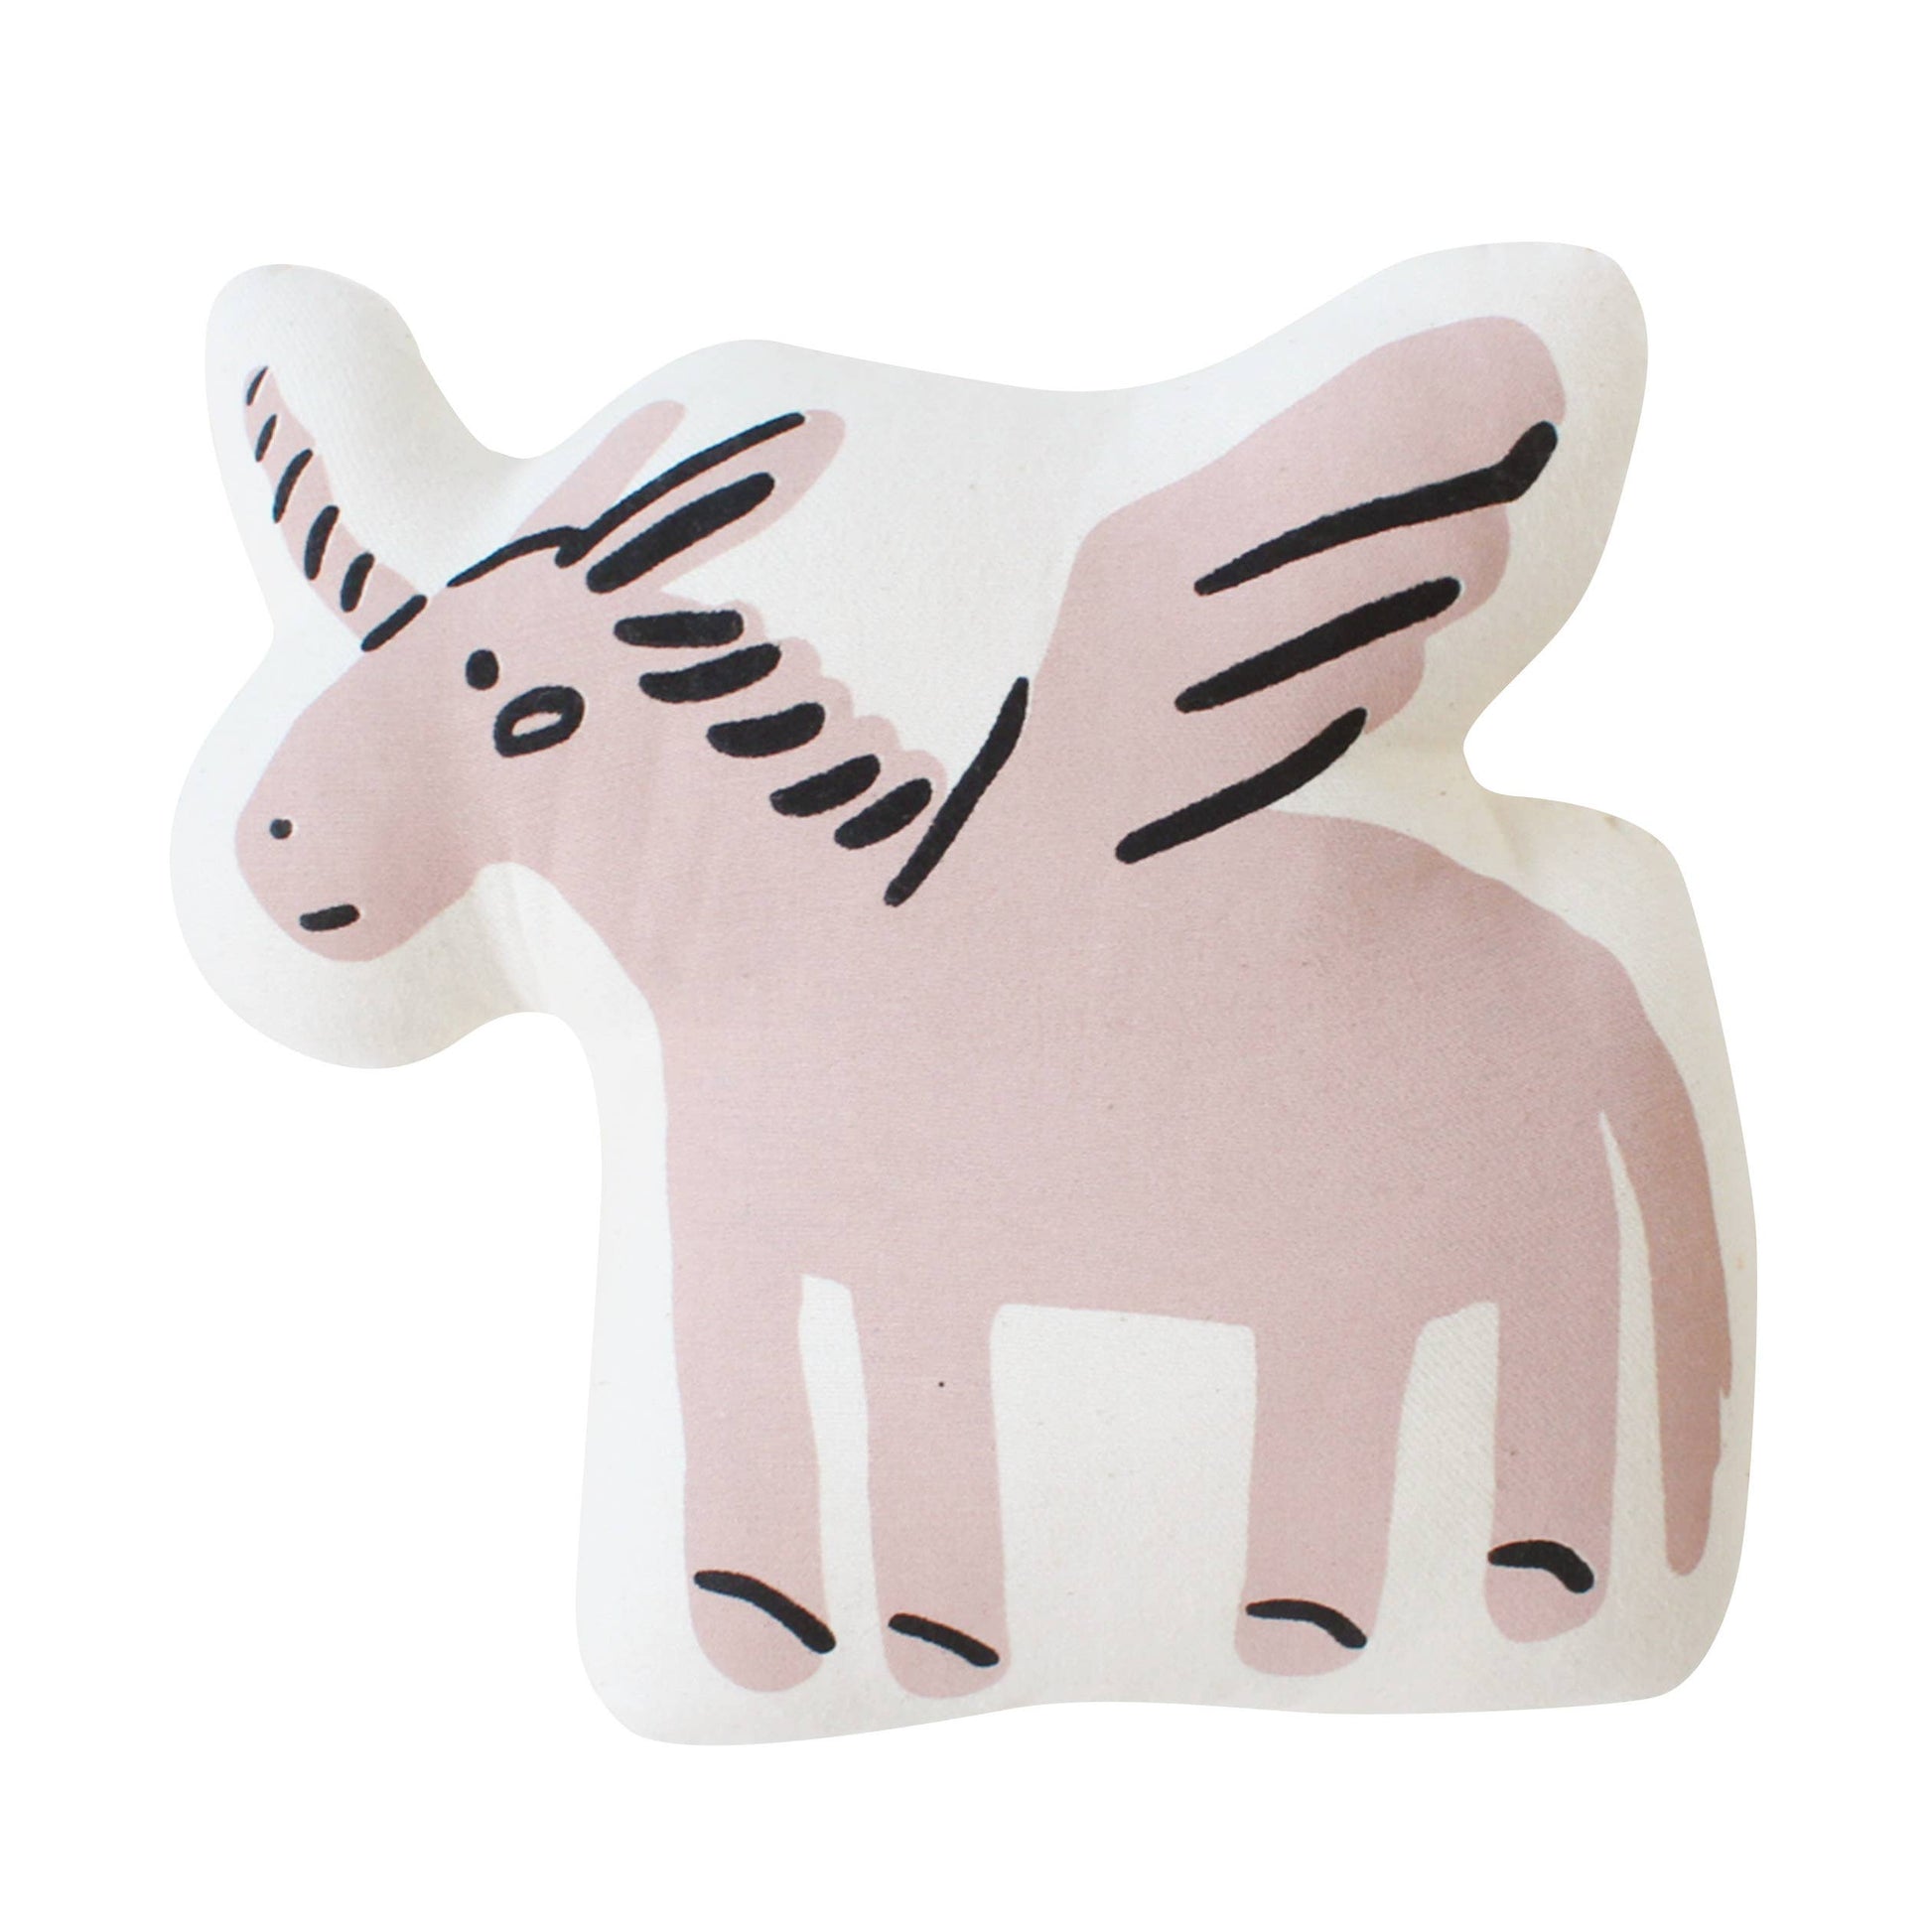 Unicorn Animal Pillow  Imani + KIDS by Imani Collective   -better made easy-eco-friendly-sustainable-gifting